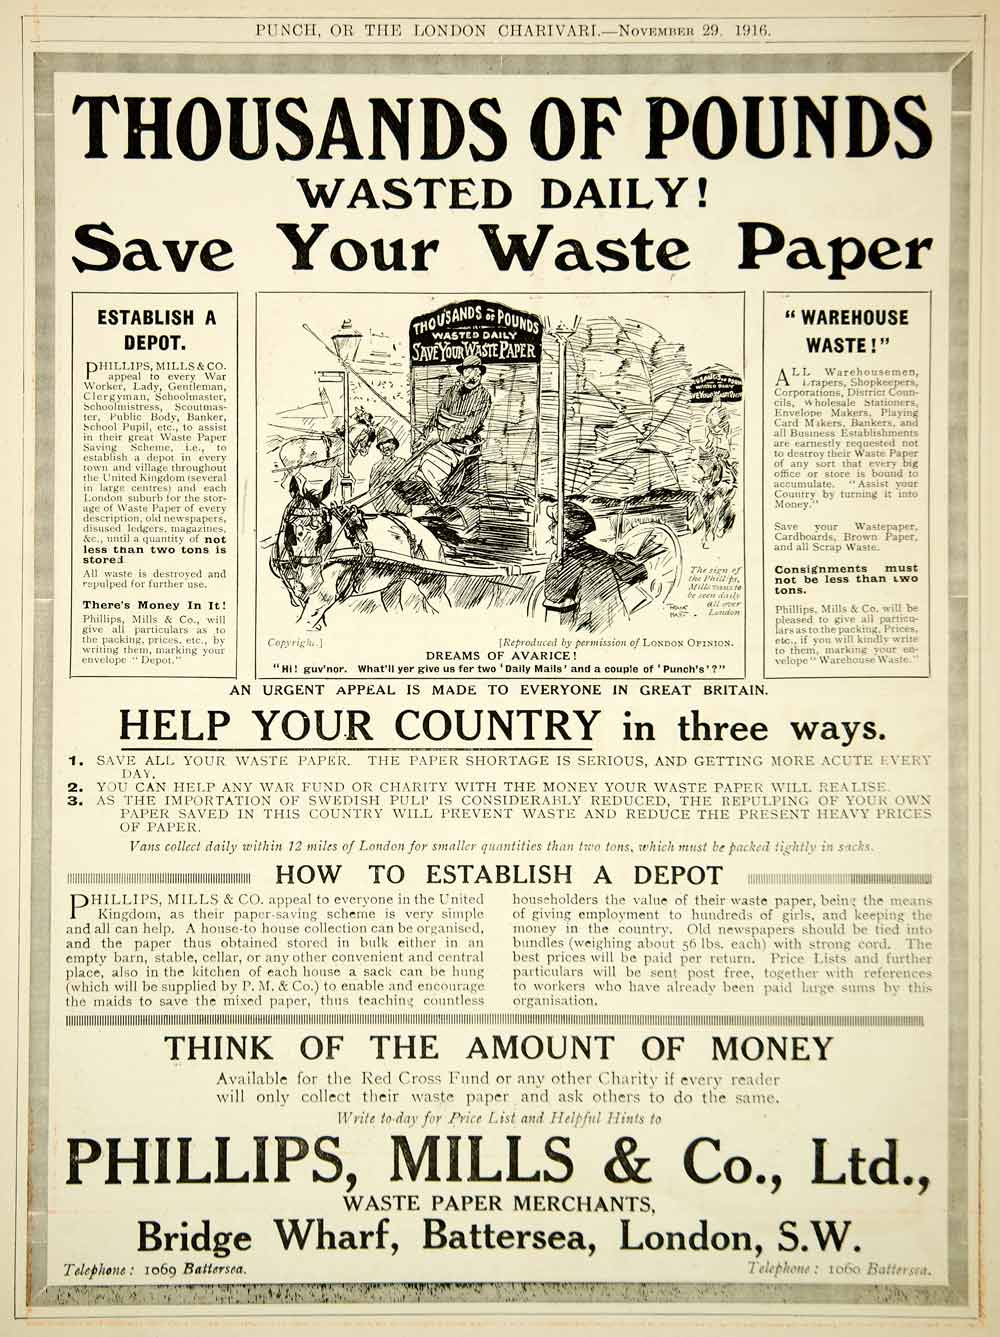 1916 Ad WWI Phillips Mills Waste Paper Recycling British Home Front War Effort